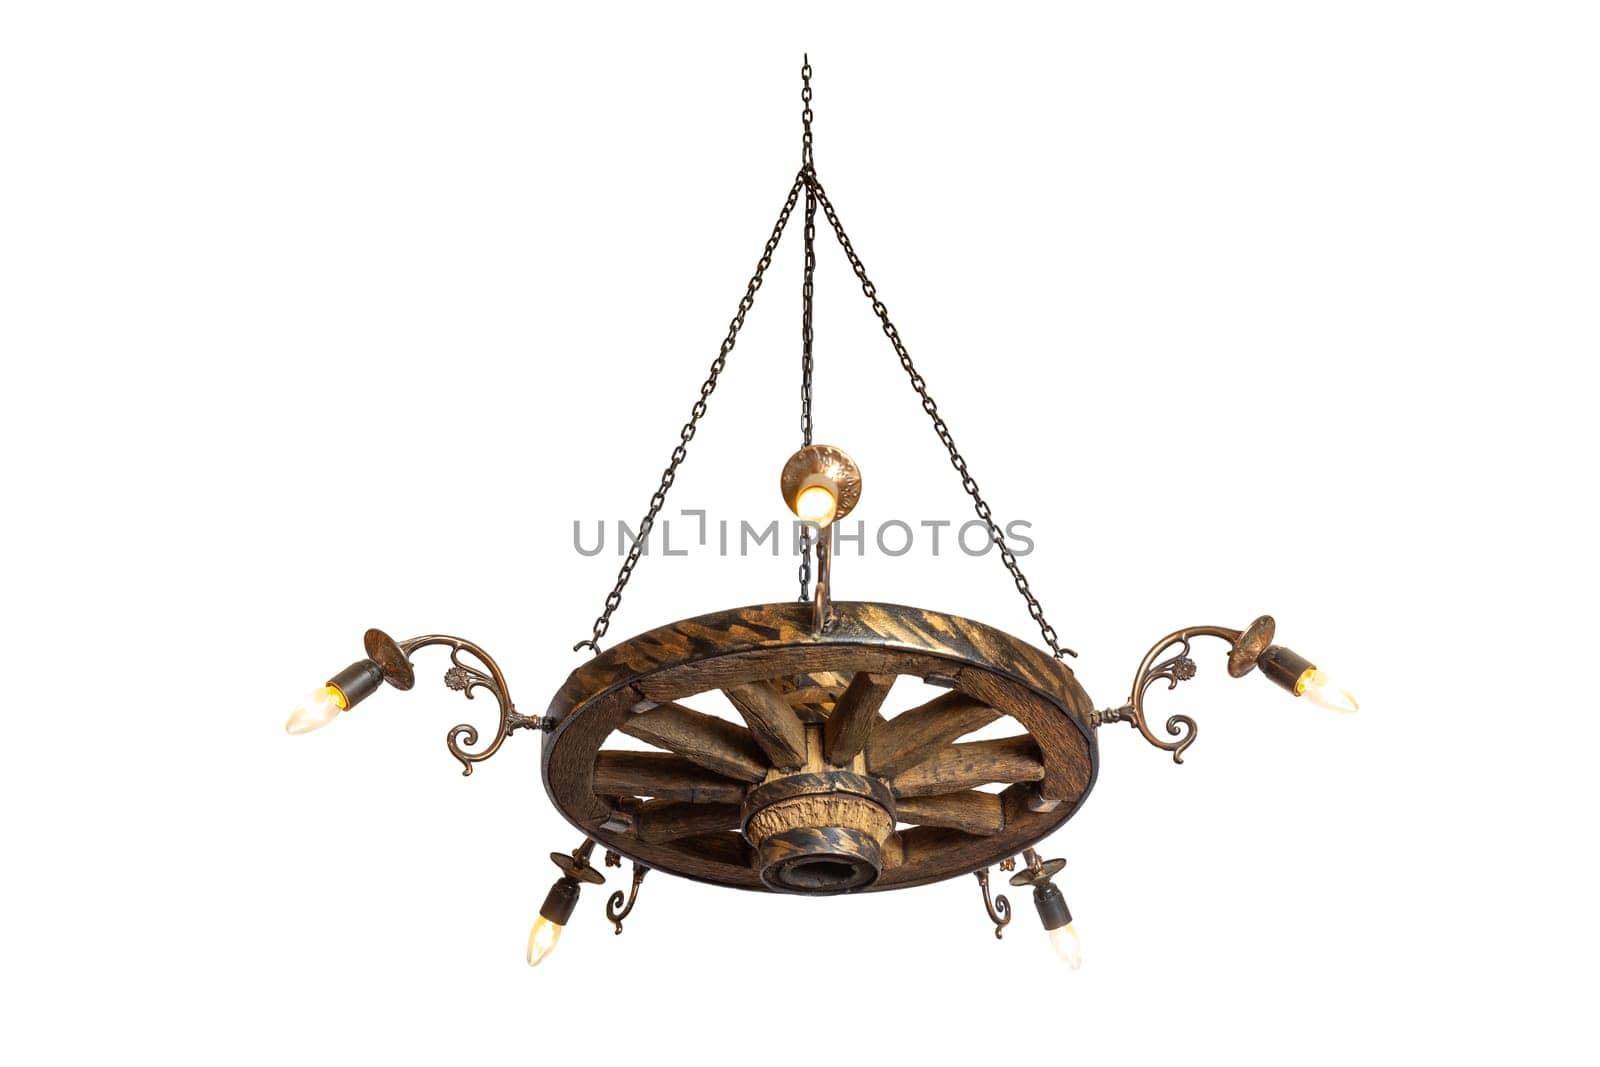 Decorative chandelier from a trolley wheel with chains and with concealed wiring. by BY-_-BY